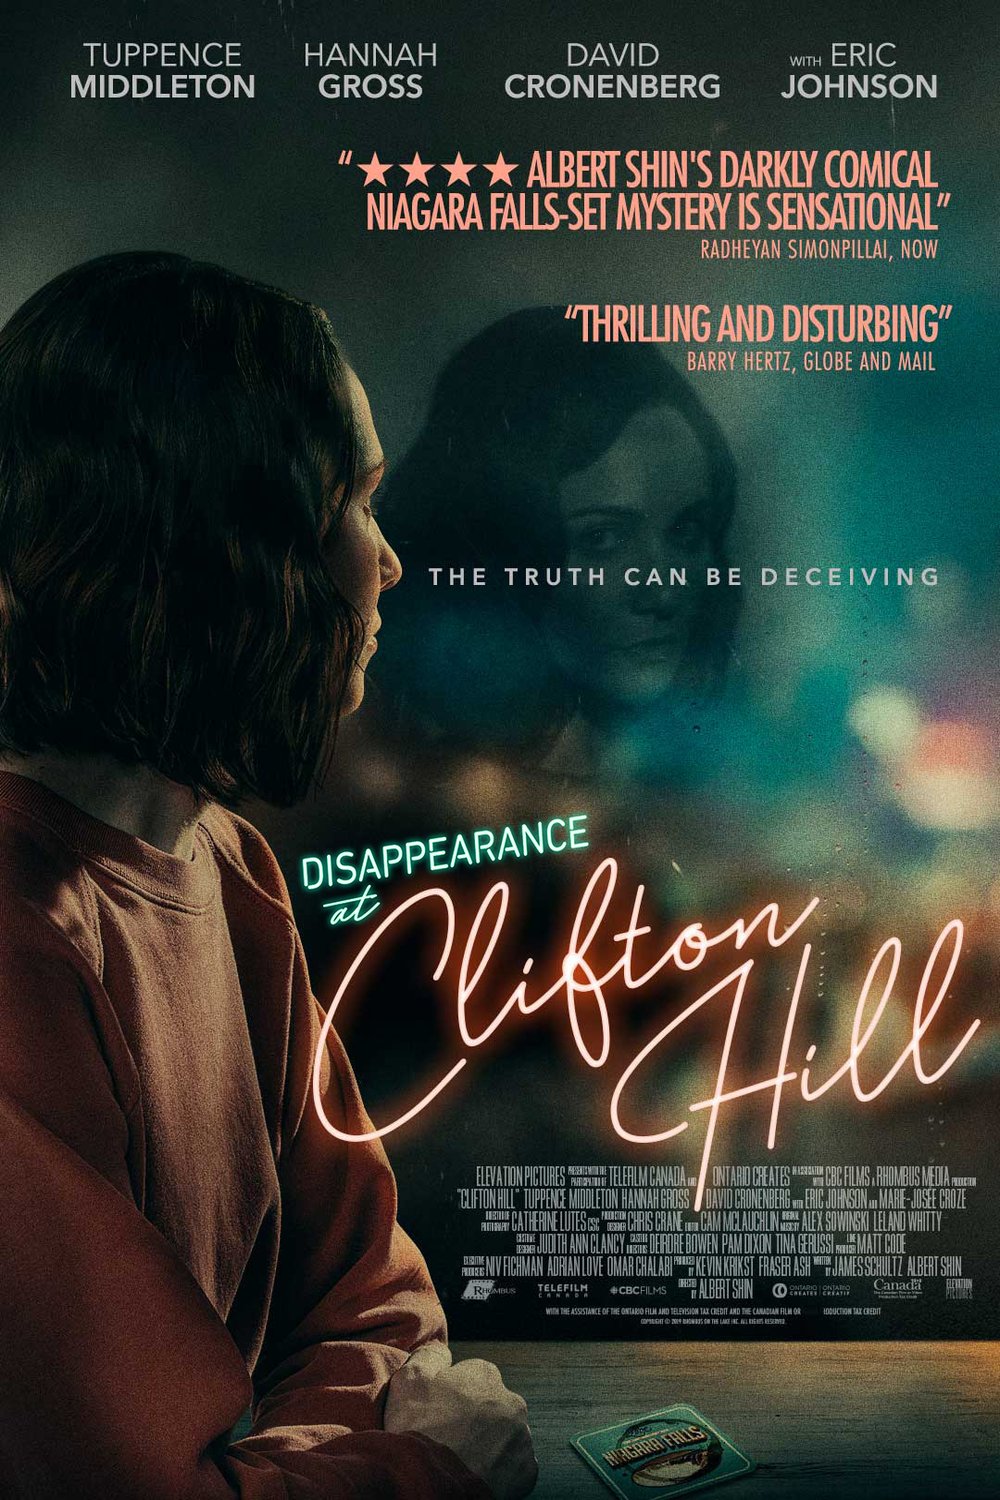 Poster of the movie Disappearance at Clifton Hill